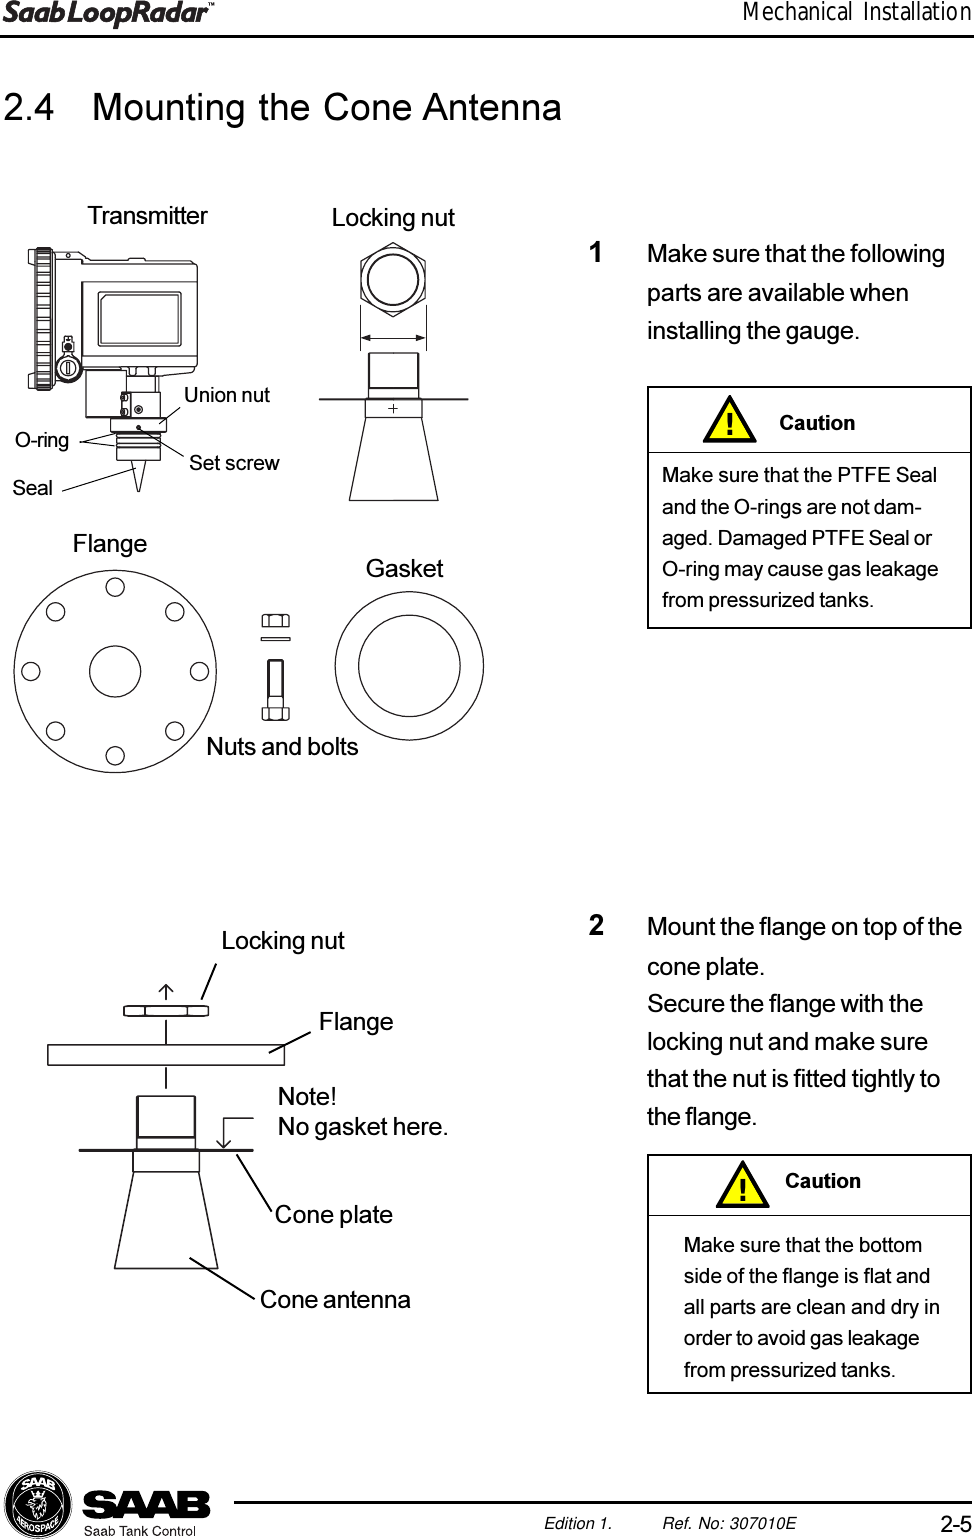 2-5Edition 1. Ref. No: 307010EMechanical Installation2.4 Mounting the Cone Antenna1Make sure that the followingparts are available wheninstalling the gauge.2Mount the flange on top of thecone plate.Secure the flange with thelocking nut and make surethat the nut is fitted tightly tothe flange.Make sure that the PTFE Sealand the O-rings are not dam-aged. Damaged PTFE Seal orO-ring may cause gas leakagefrom pressurized tanks.!CautionMake sure that the bottomside of the flange is flat andall parts are clean and dry inorder to avoid gas leakagefrom pressurized tanks.!CautionTransmitter Locking nutFlange GasketNuts and boltsUnion nutSet screwO-ringSealLocking nutFlangeNote!No gasket here.Cone plateCone antenna